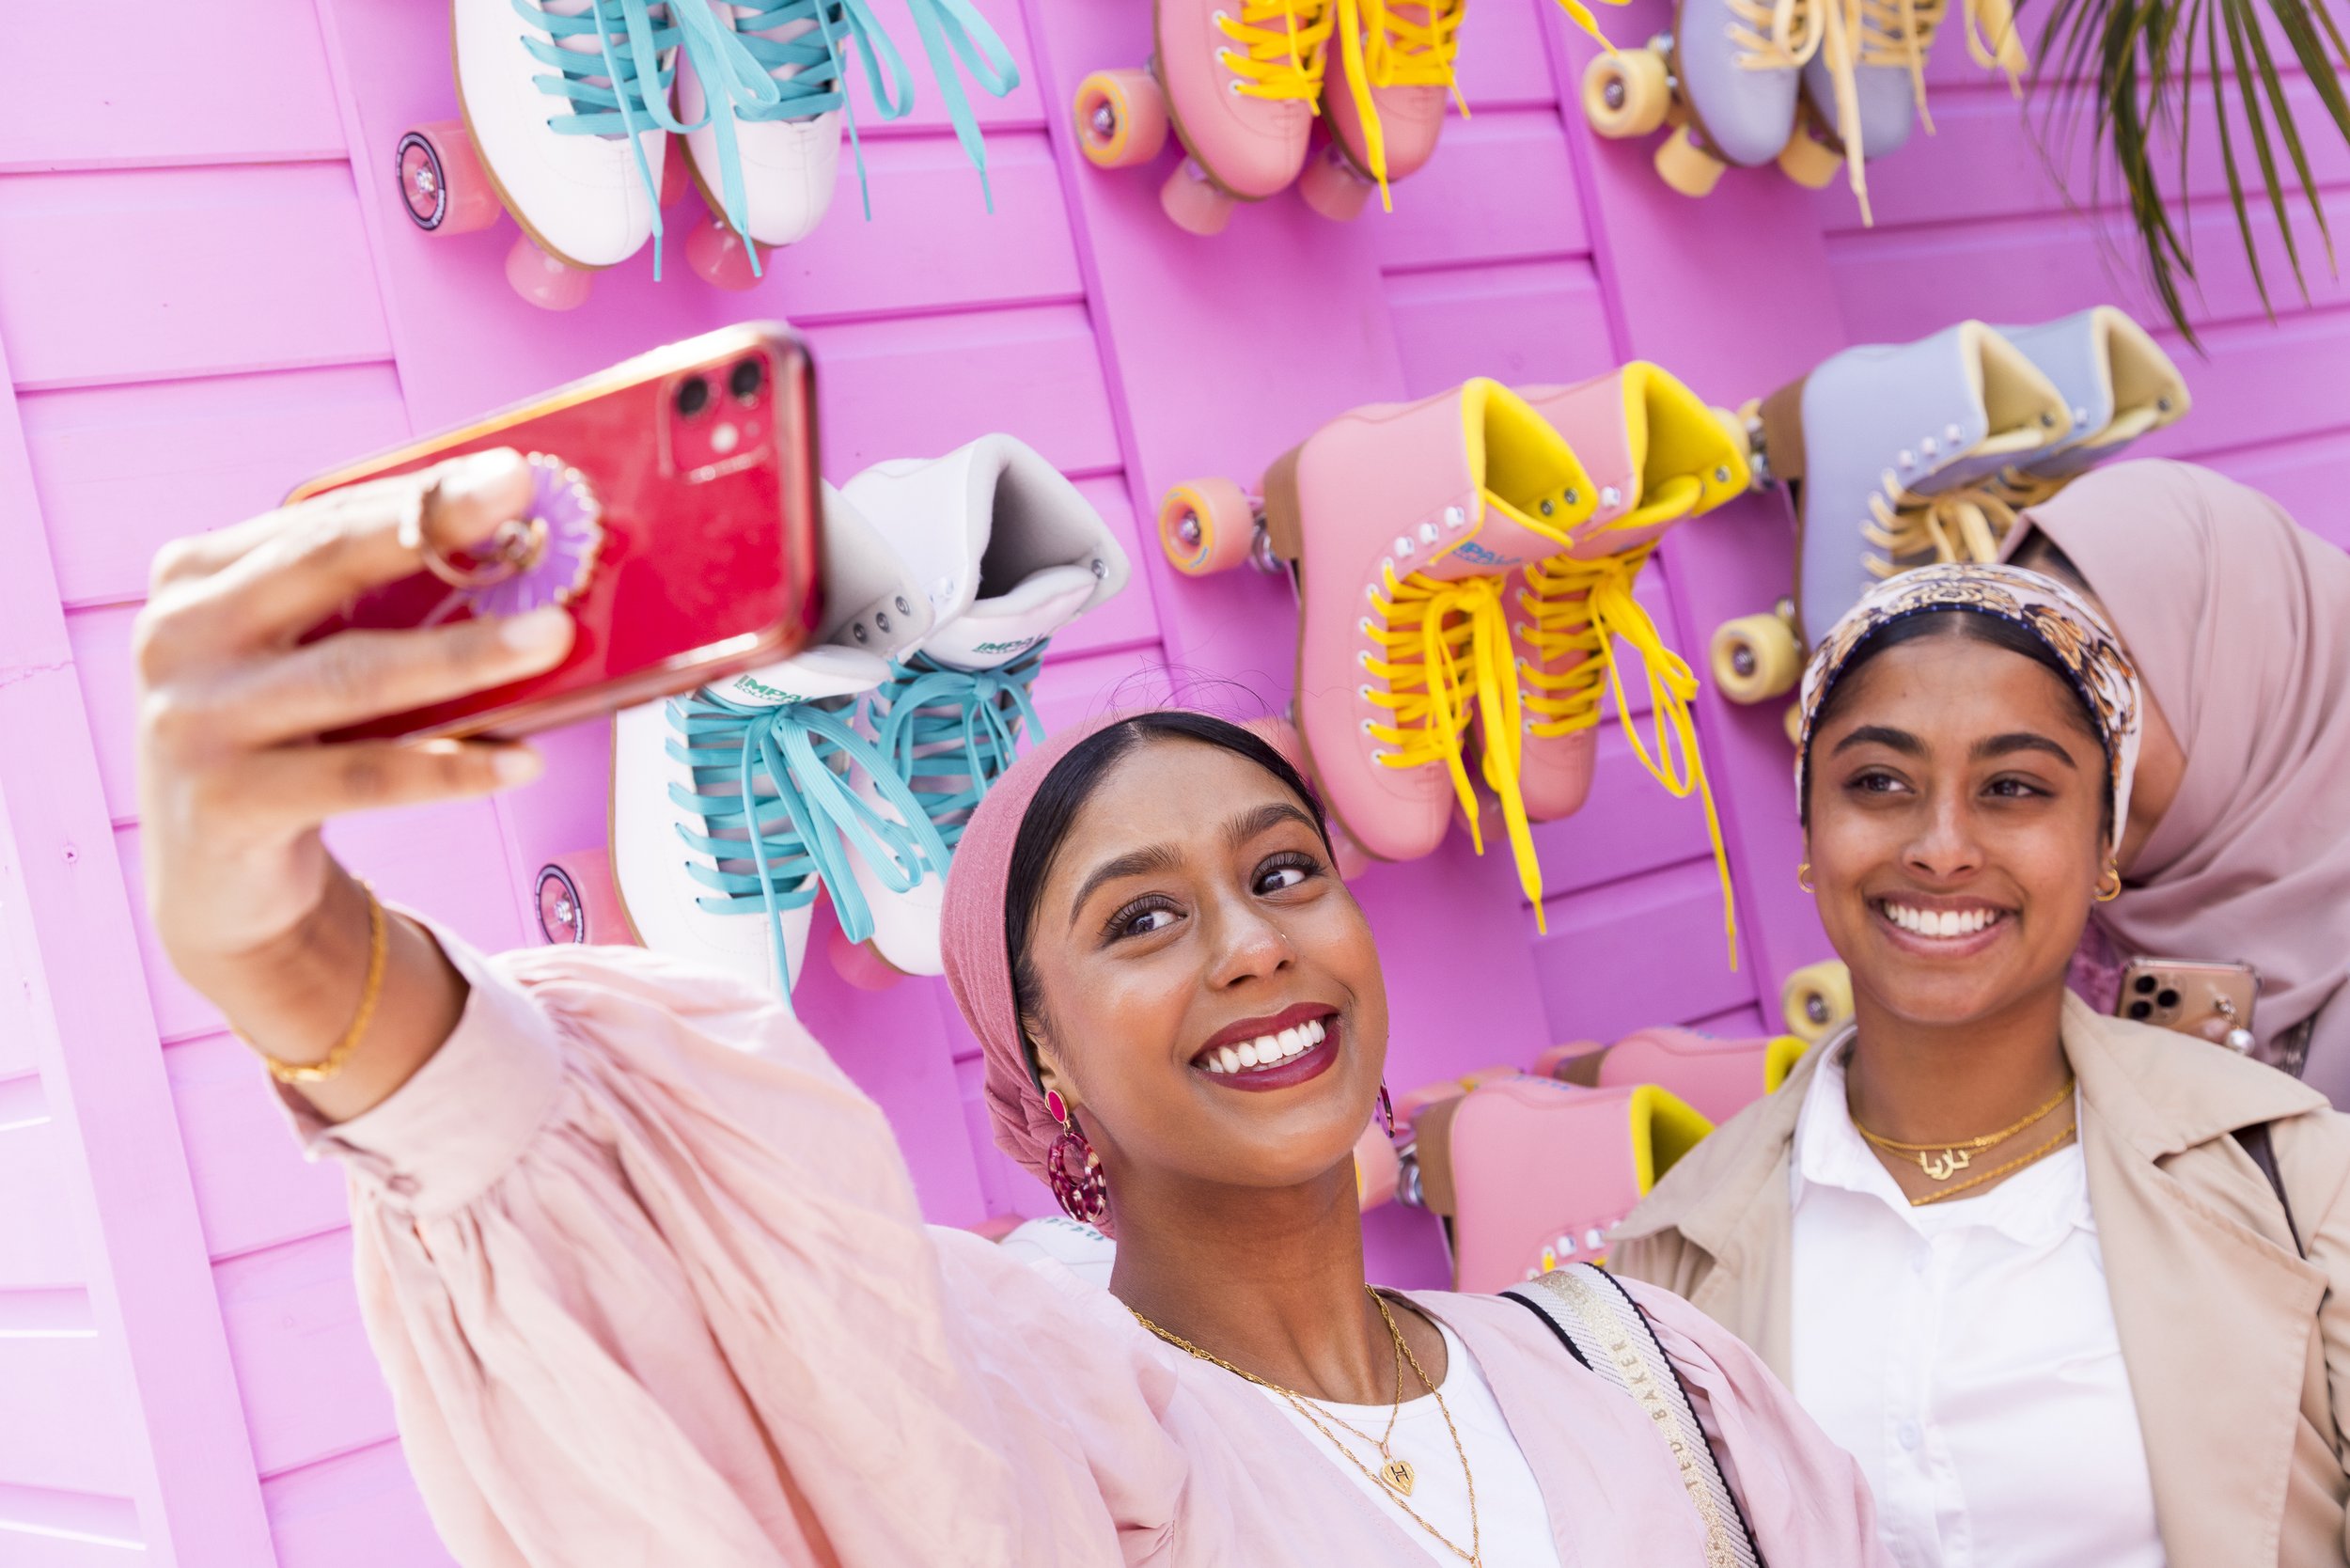 Collabs, Activations & Events Celebrating The Barbie Movie in NYC